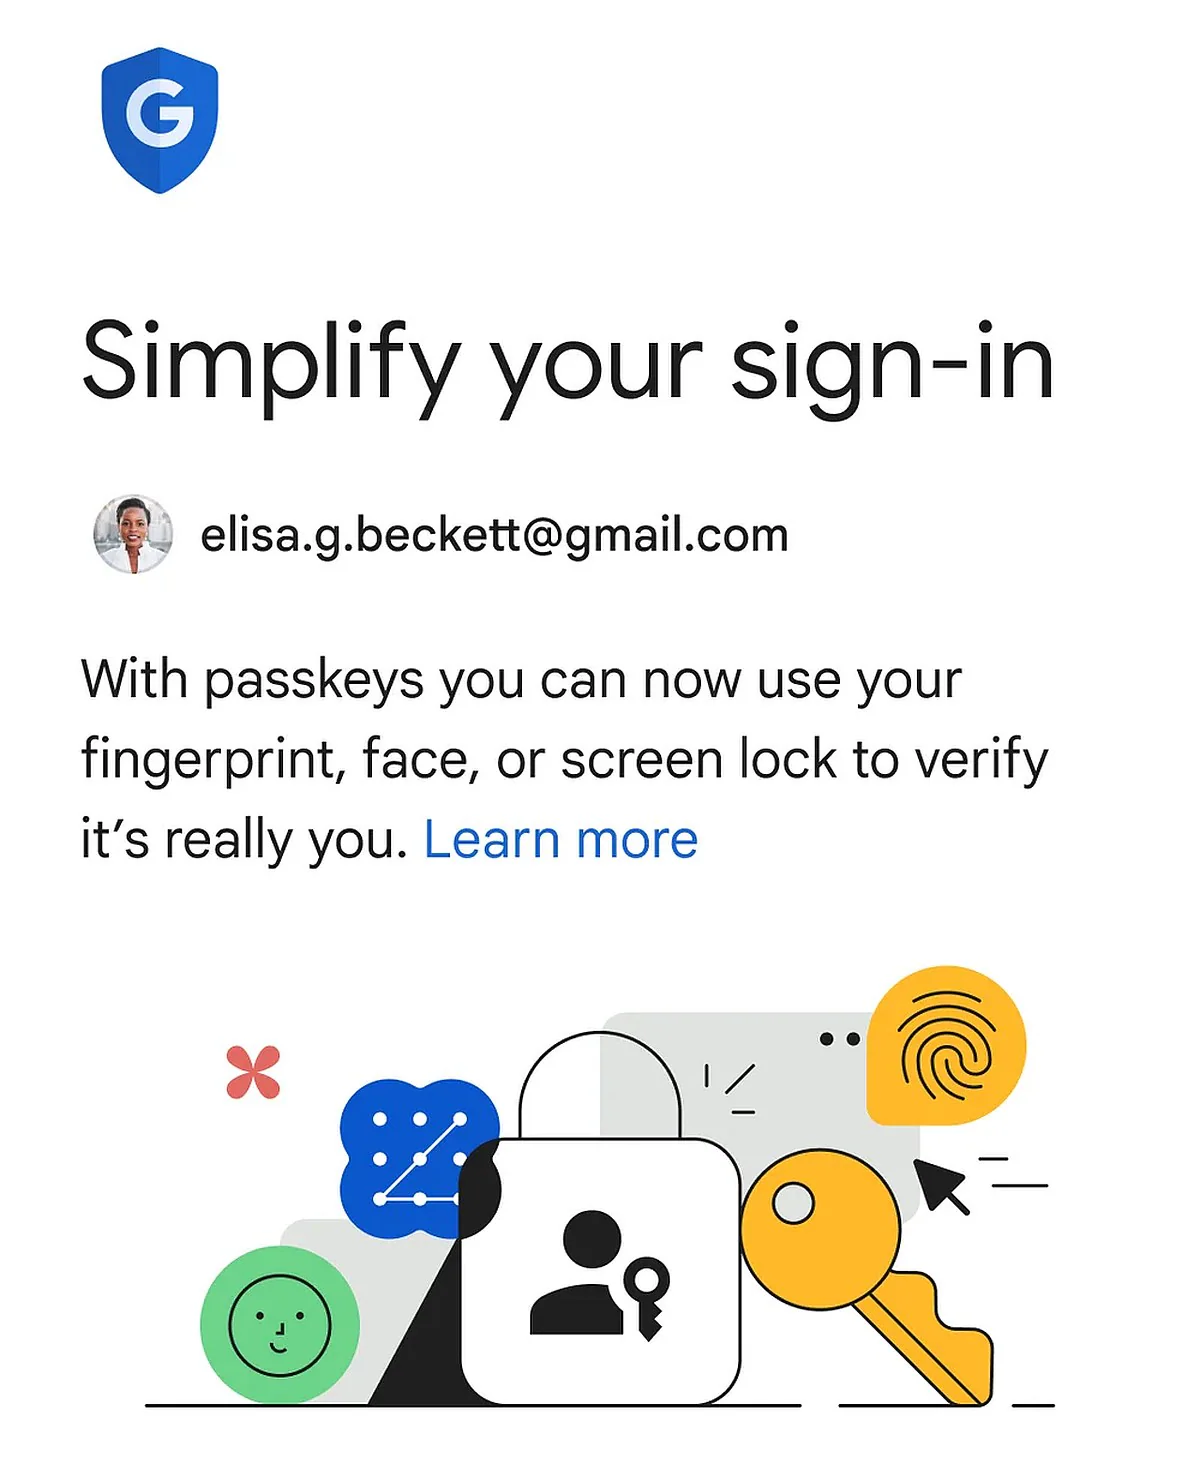 Passkeys will use your face, fingerprint or device PIN to log in to your account